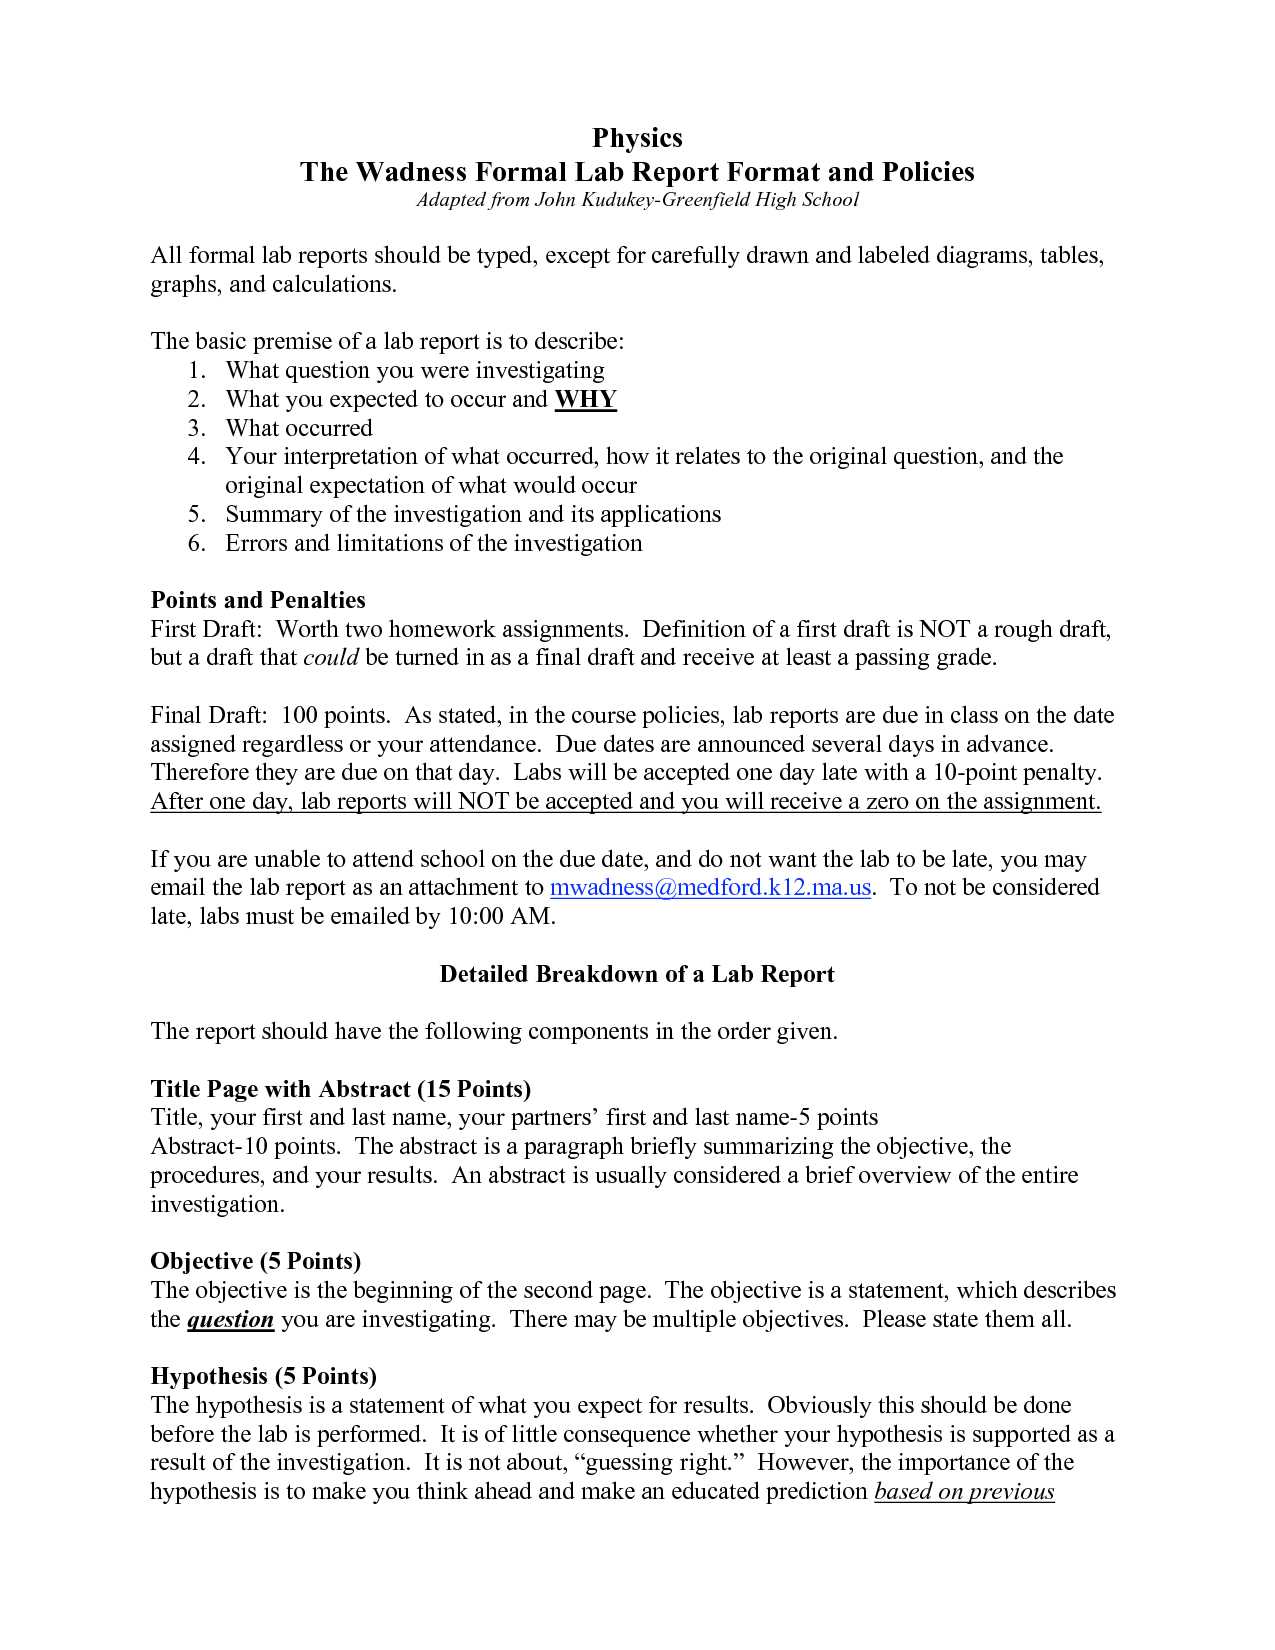 Formal Lab Report Template Physics : Biological Science Inside Formal Lab Report Template